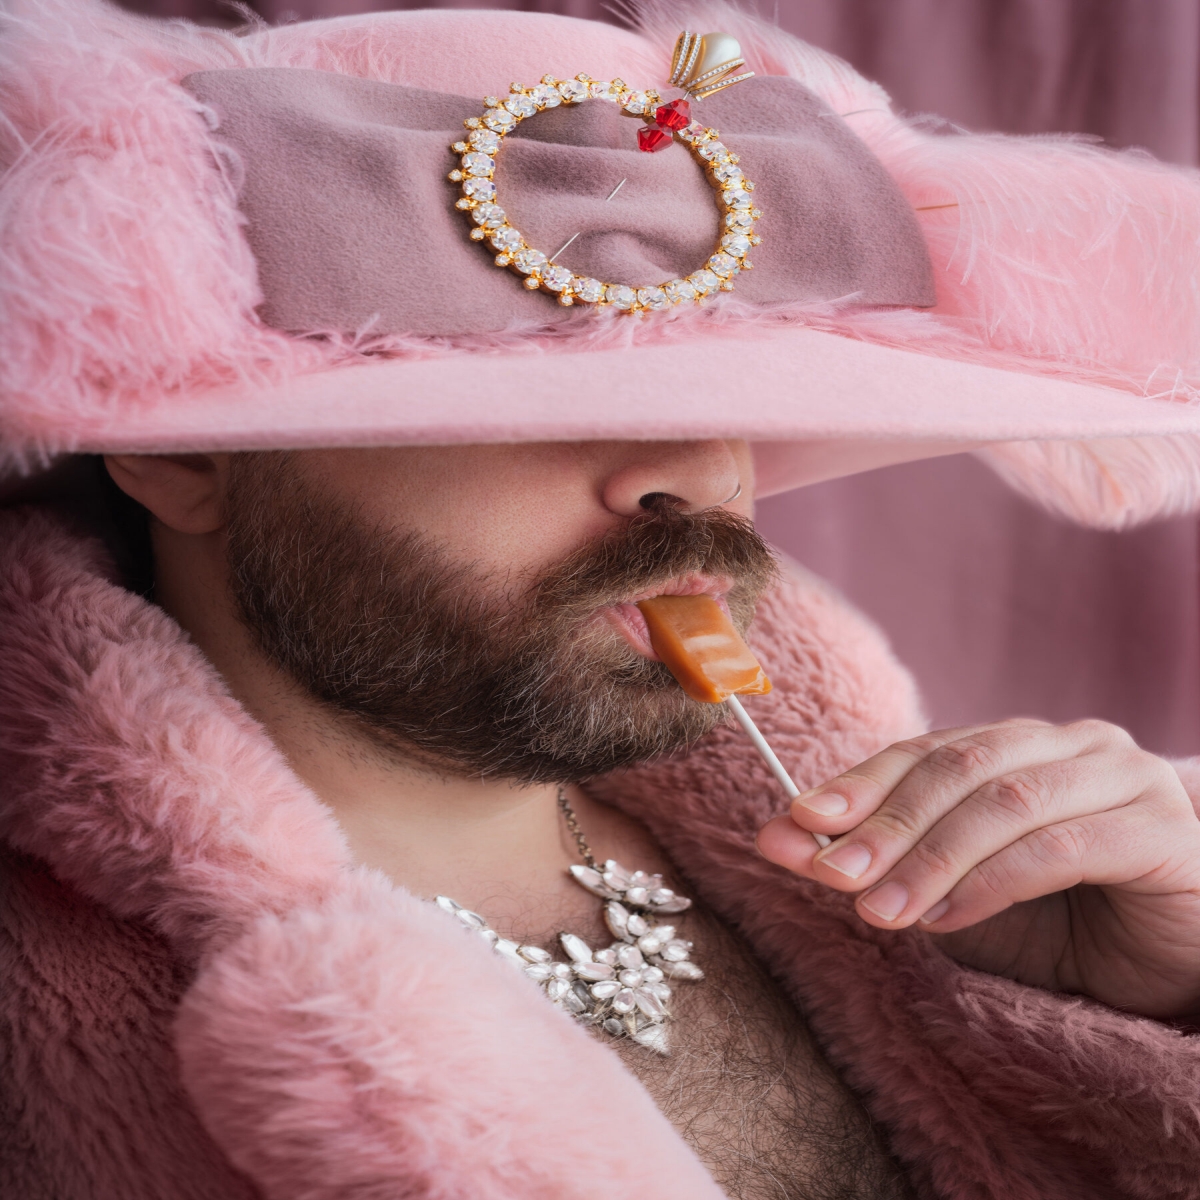 A man dressed in pink with eyes obscured tasting candy